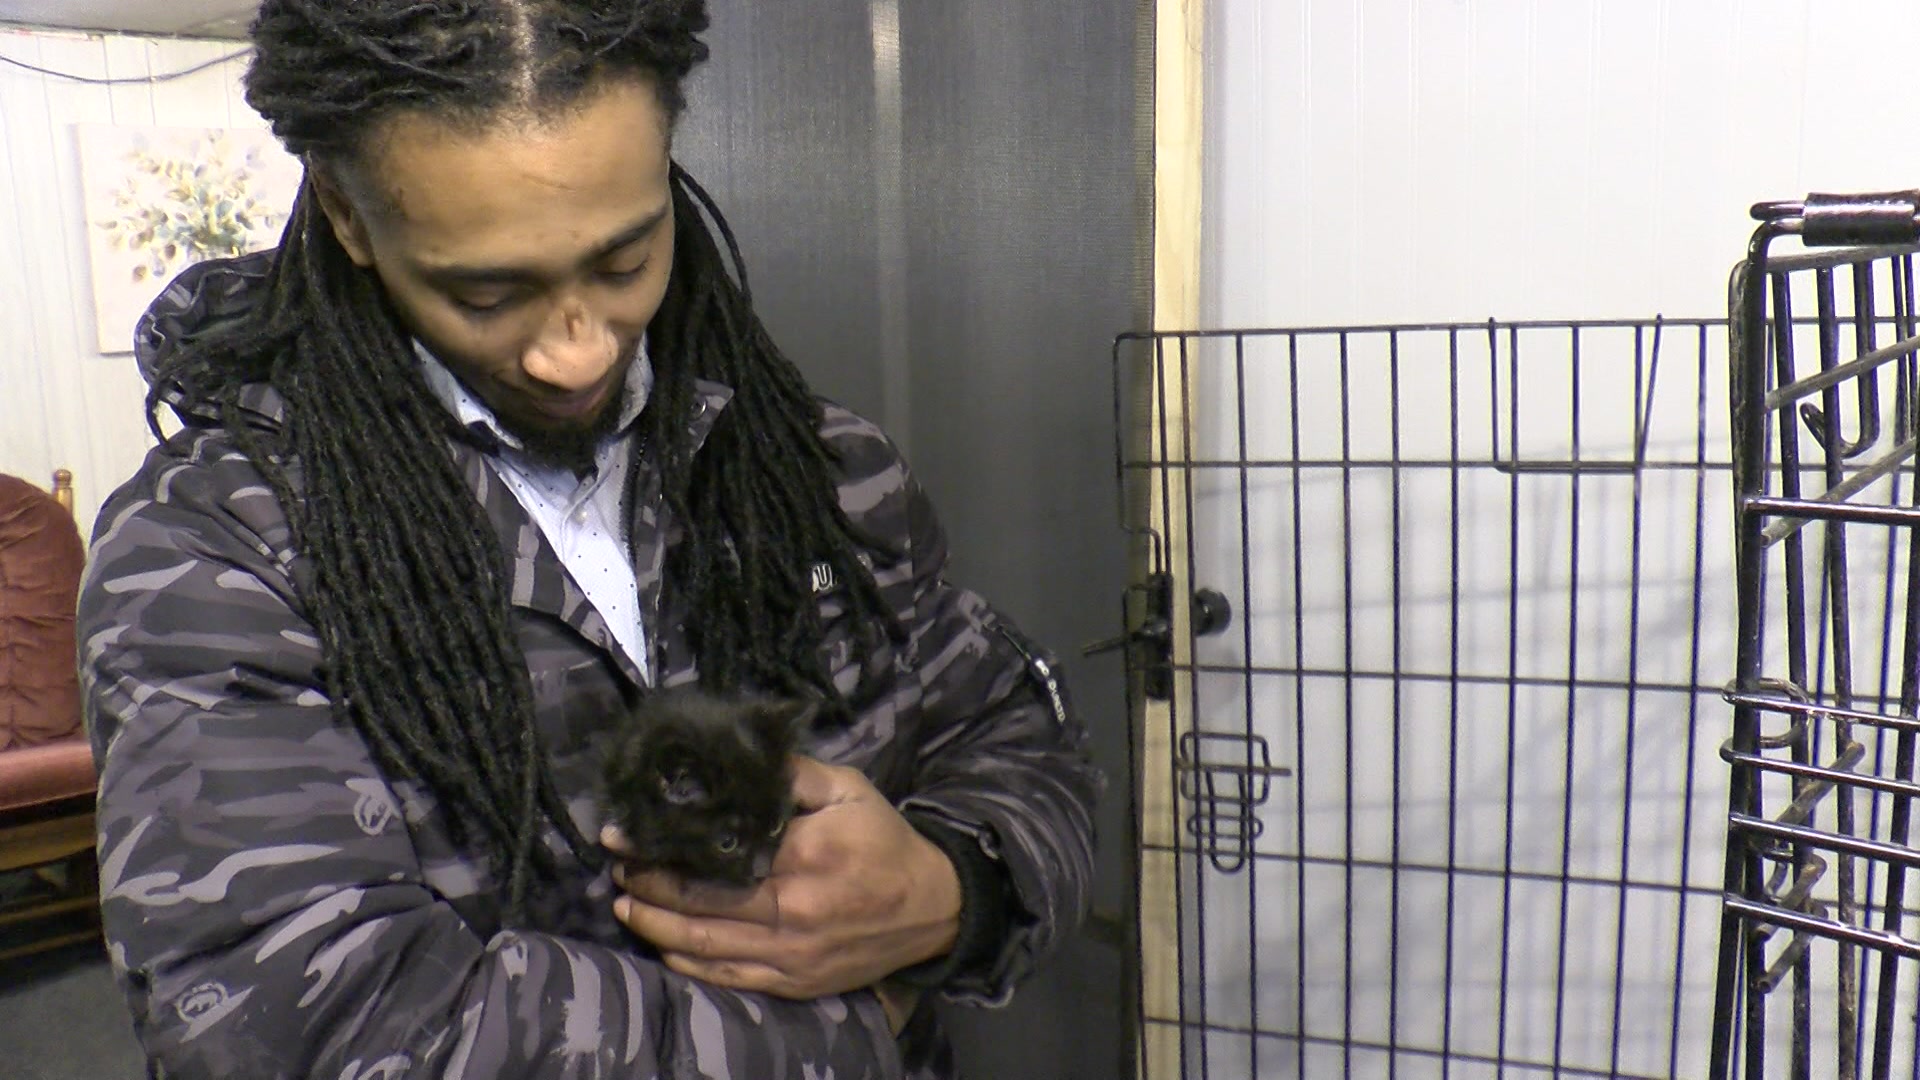 ‘It feels amazing’: Milwaukee handyman captures hearts on social media for rescuing cats [Video]